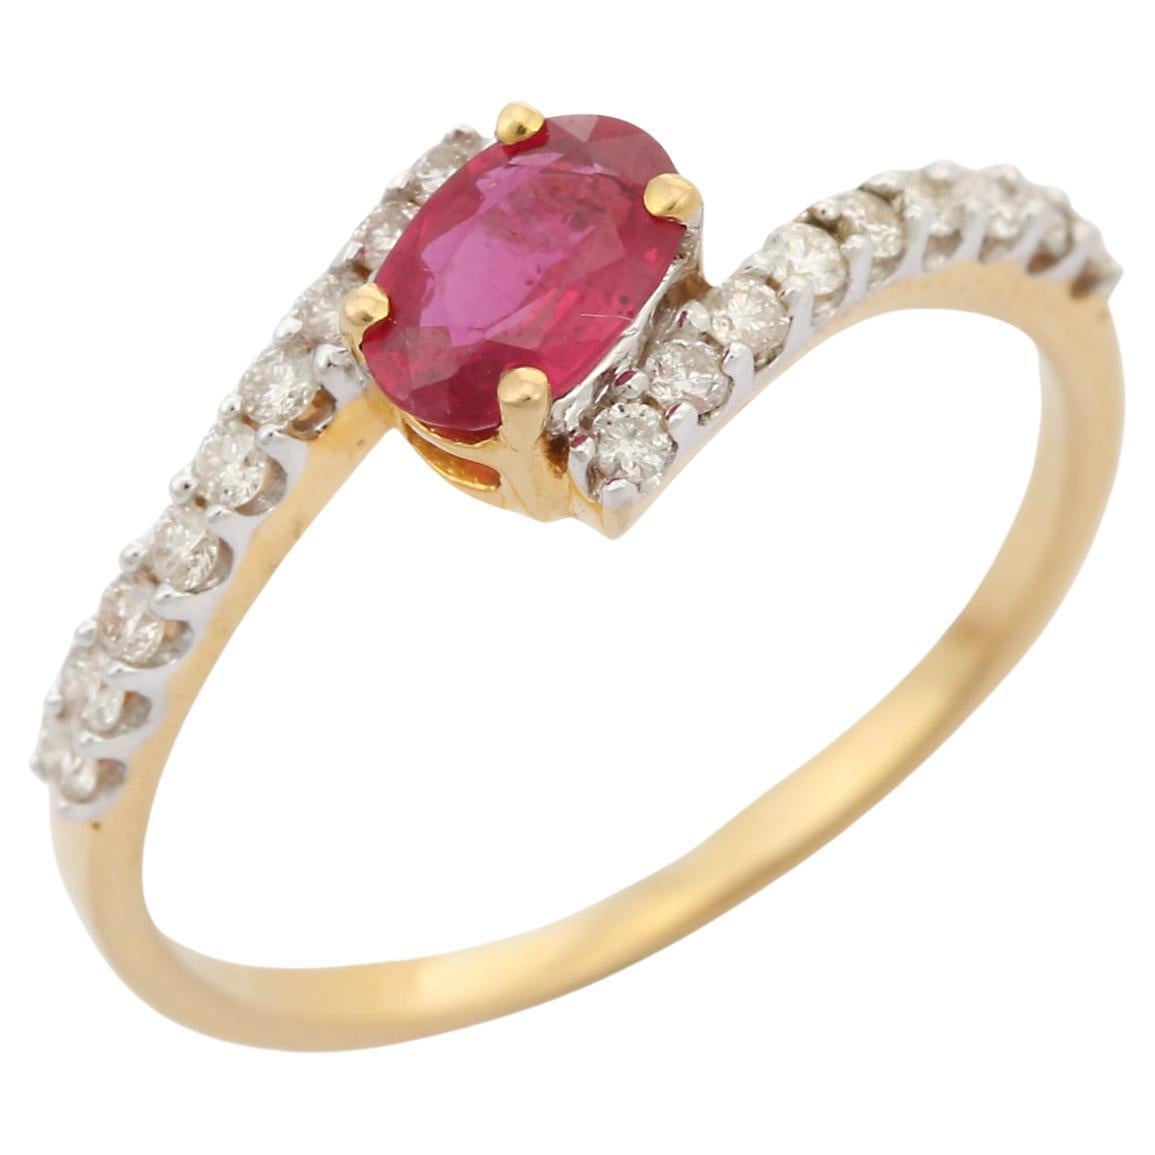 For Sale:  Designer Natural Diamond and Ruby Ring in Solid 18k Yellow Gold